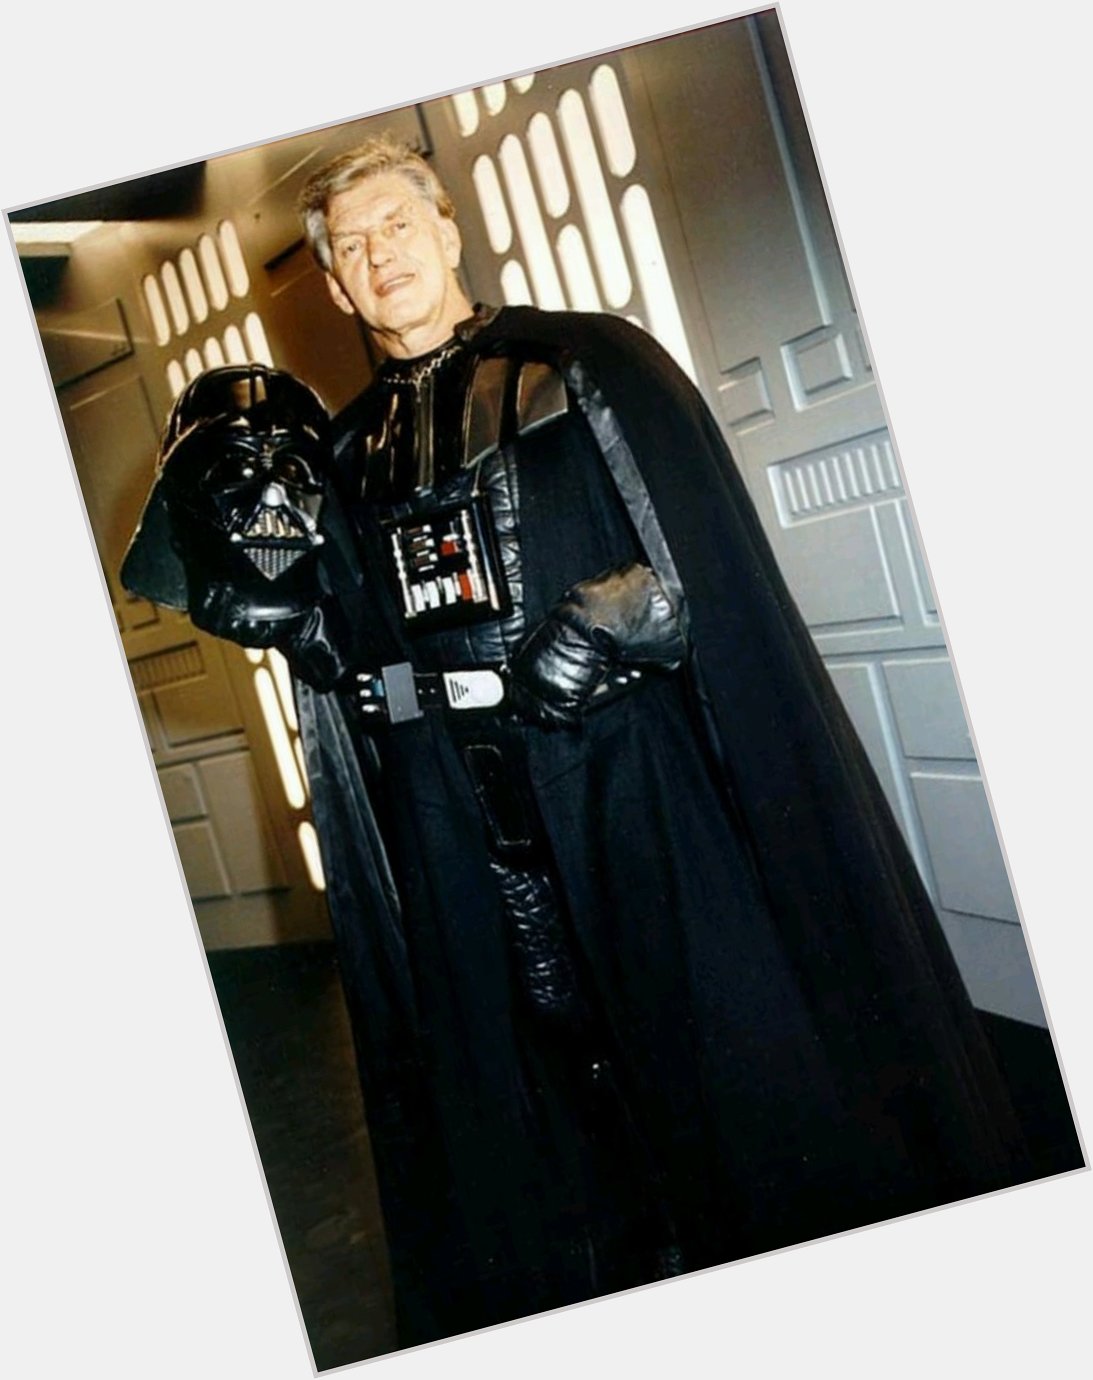 Today, David Prowse turns 82. Happy birthday 